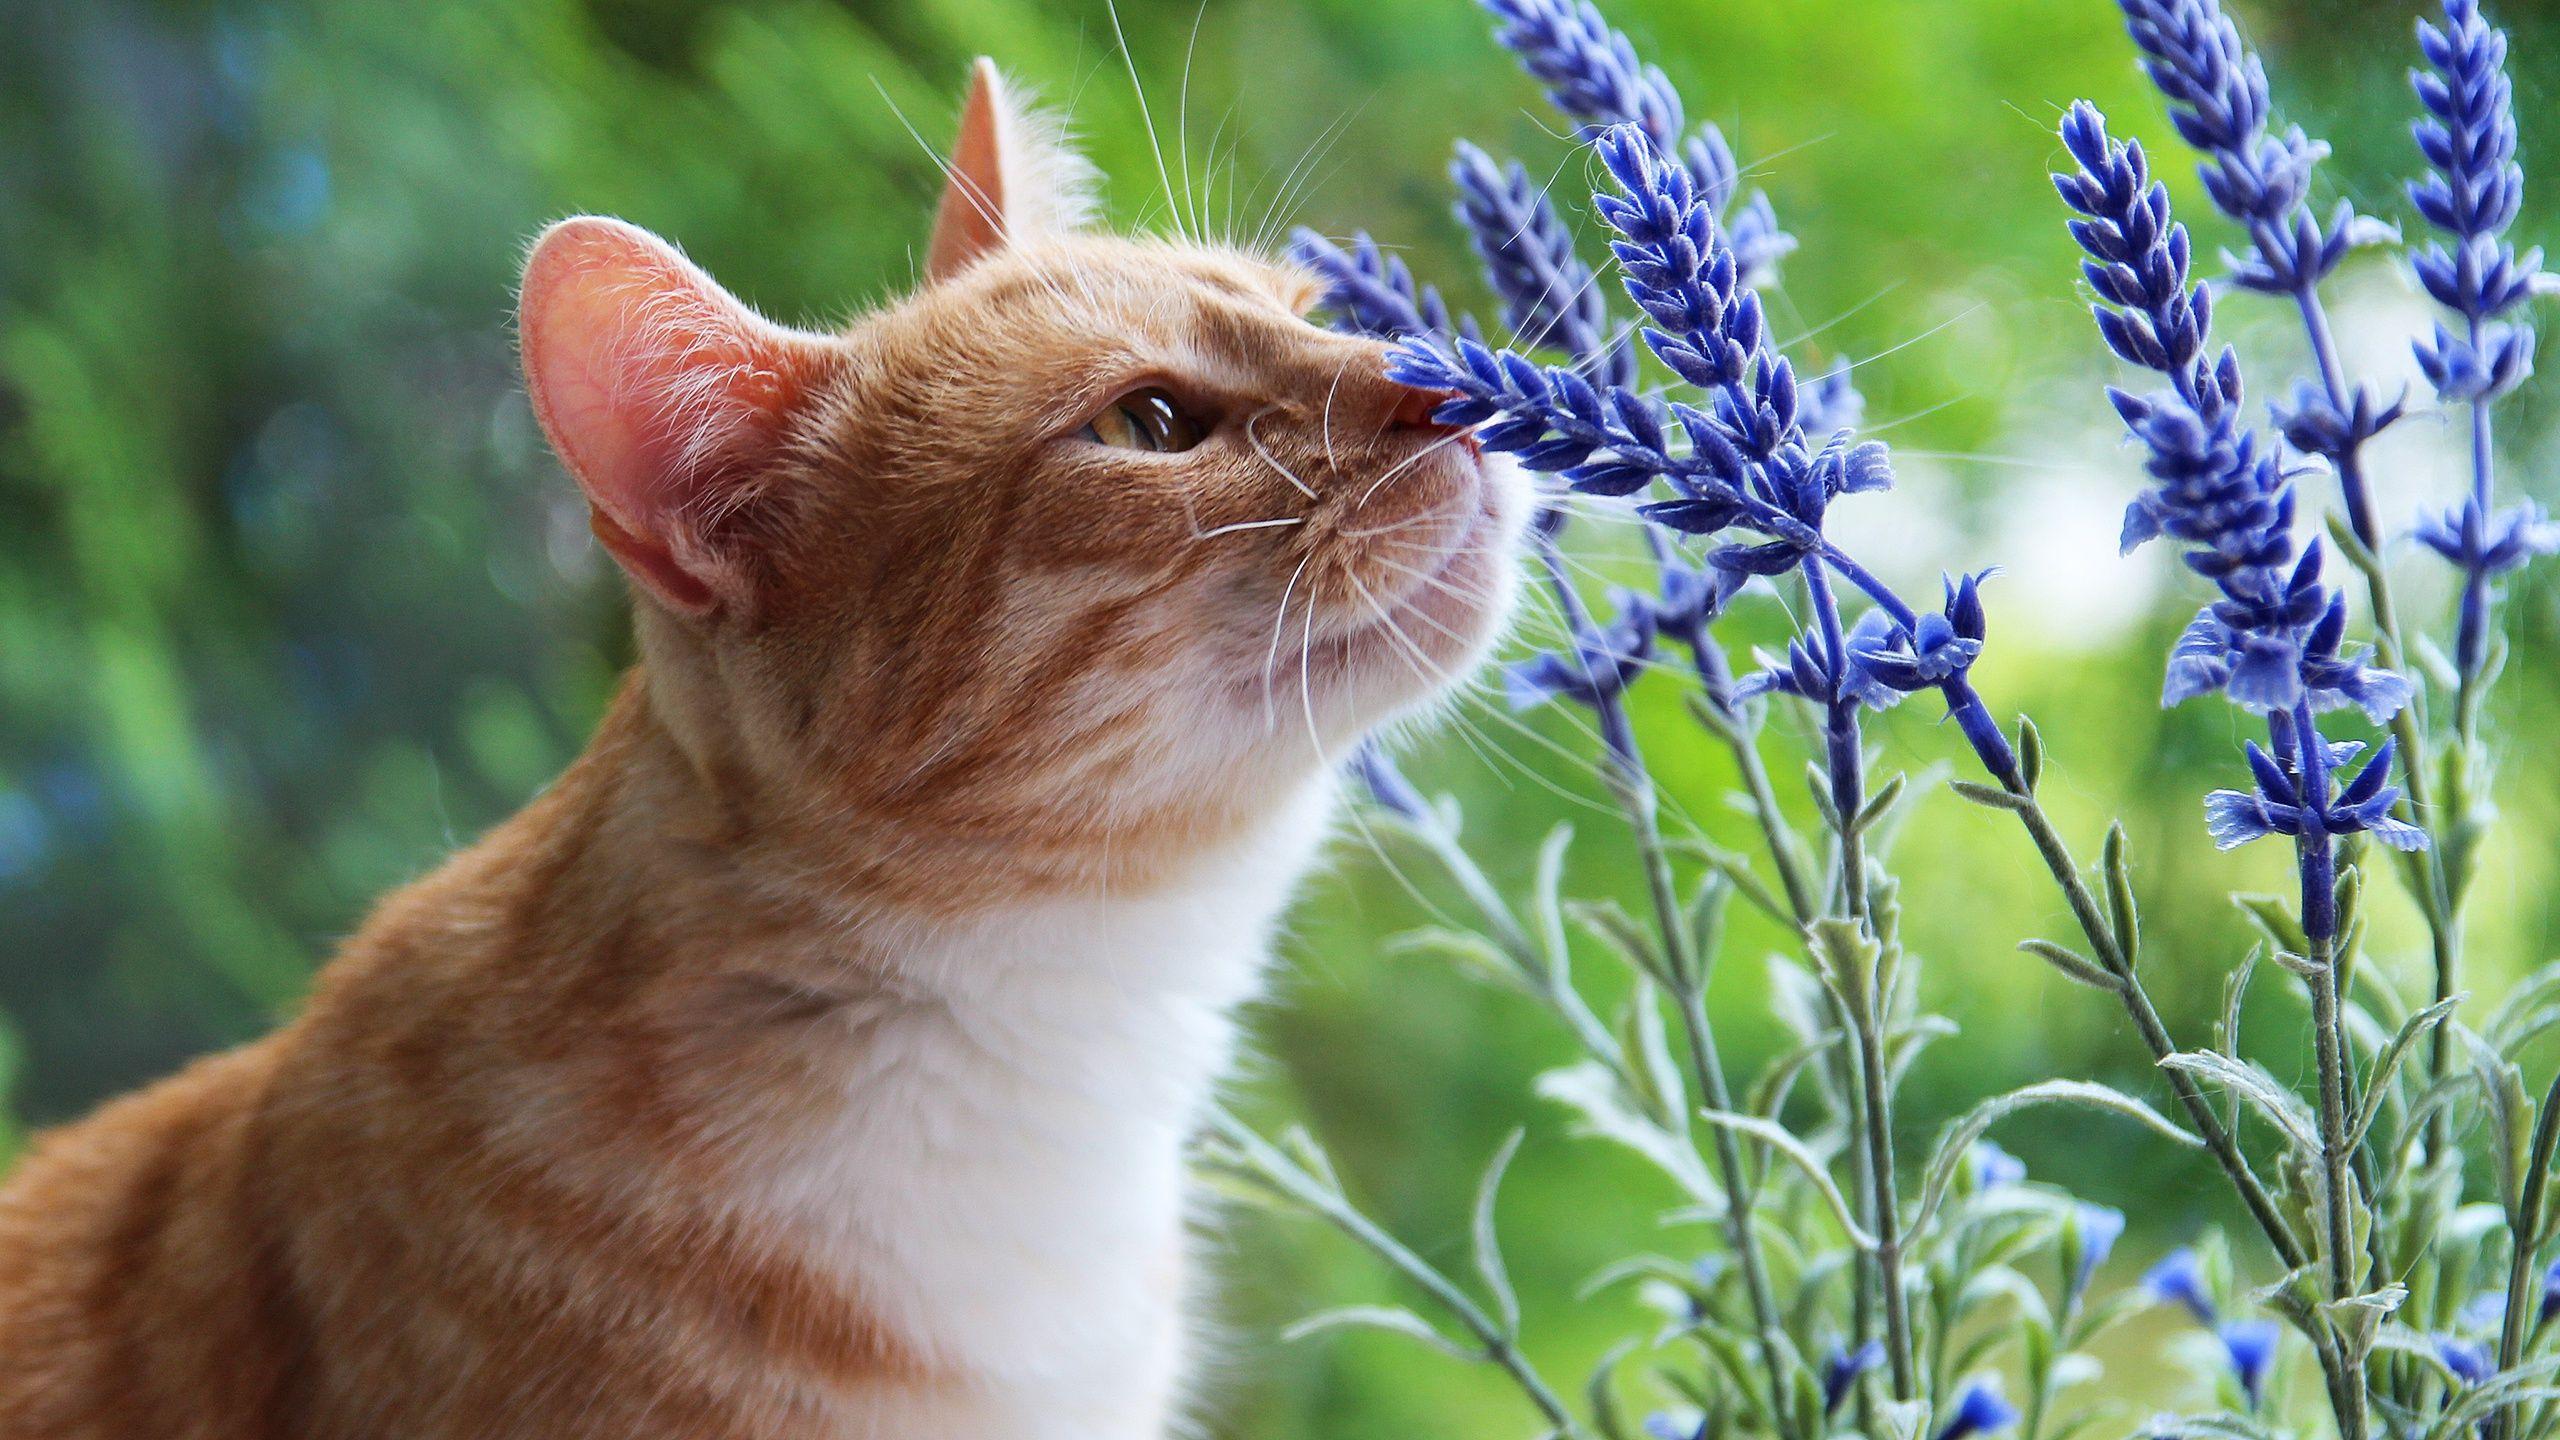 Cat and Flower Wallpapers - Top Free Cat and Flower Backgrounds